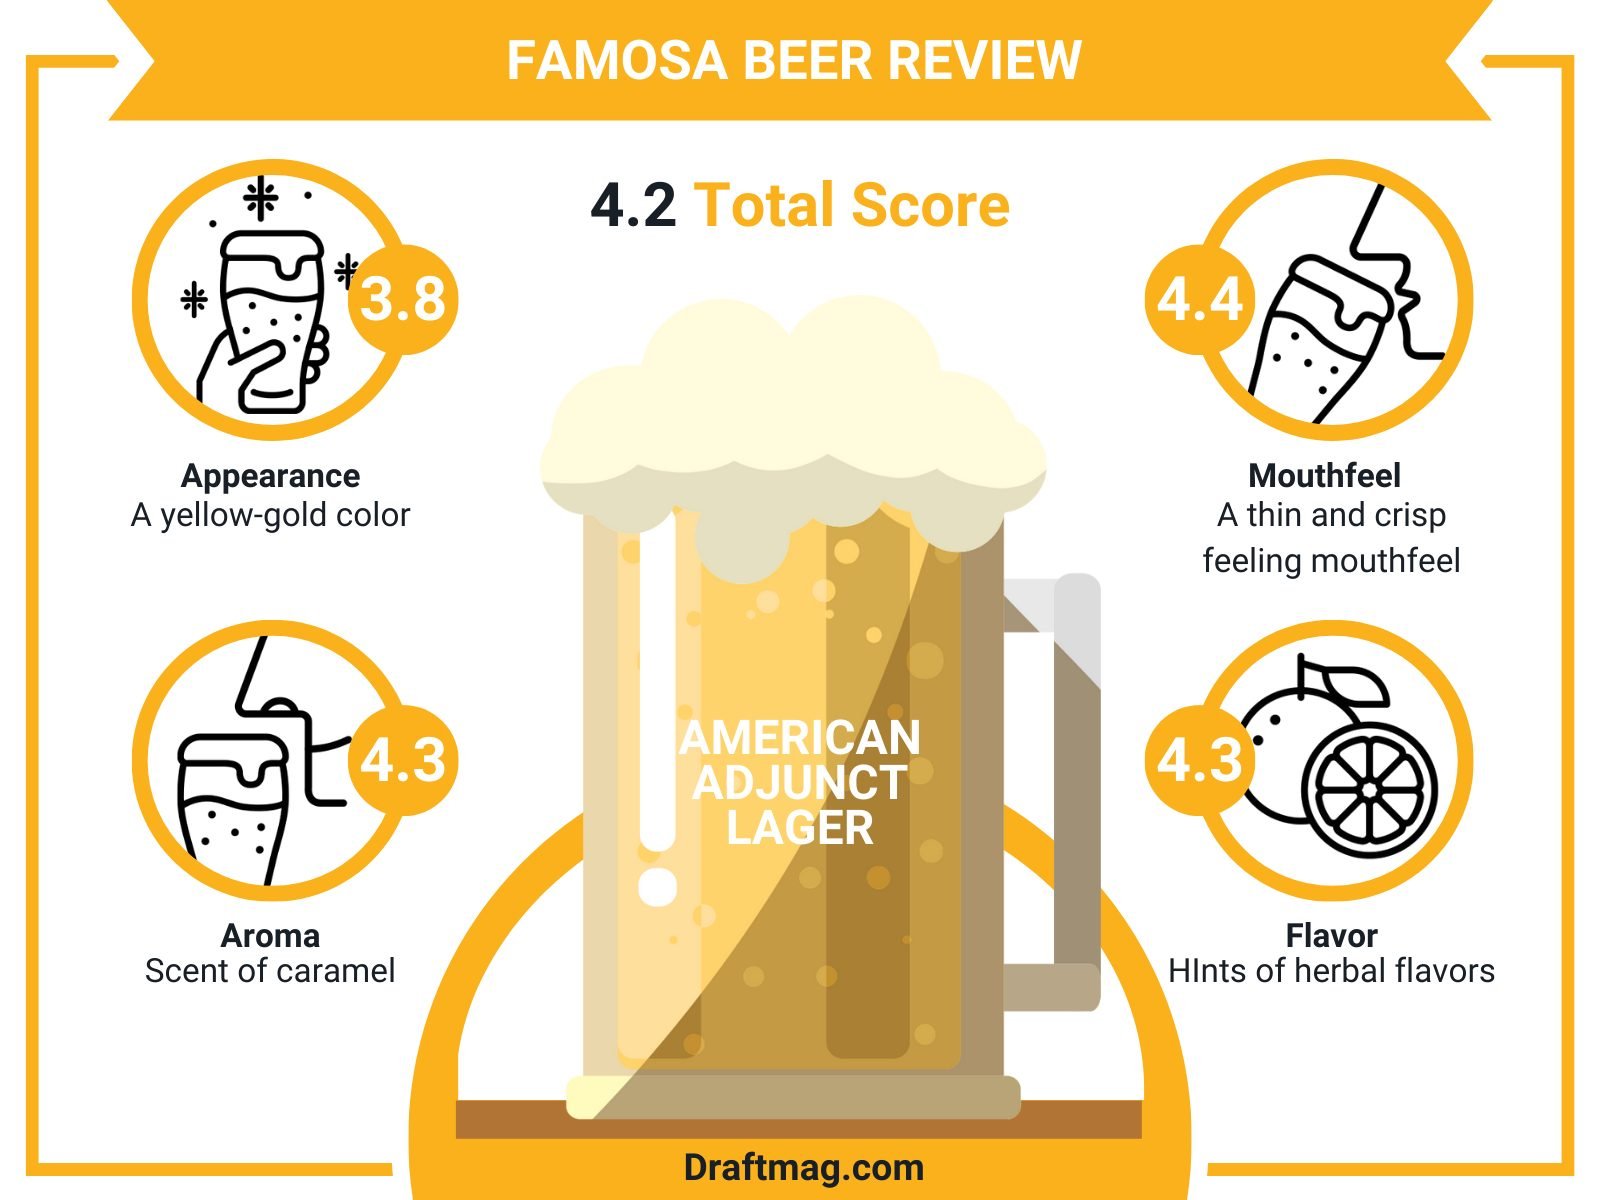 Famosa Beer Review Infographic